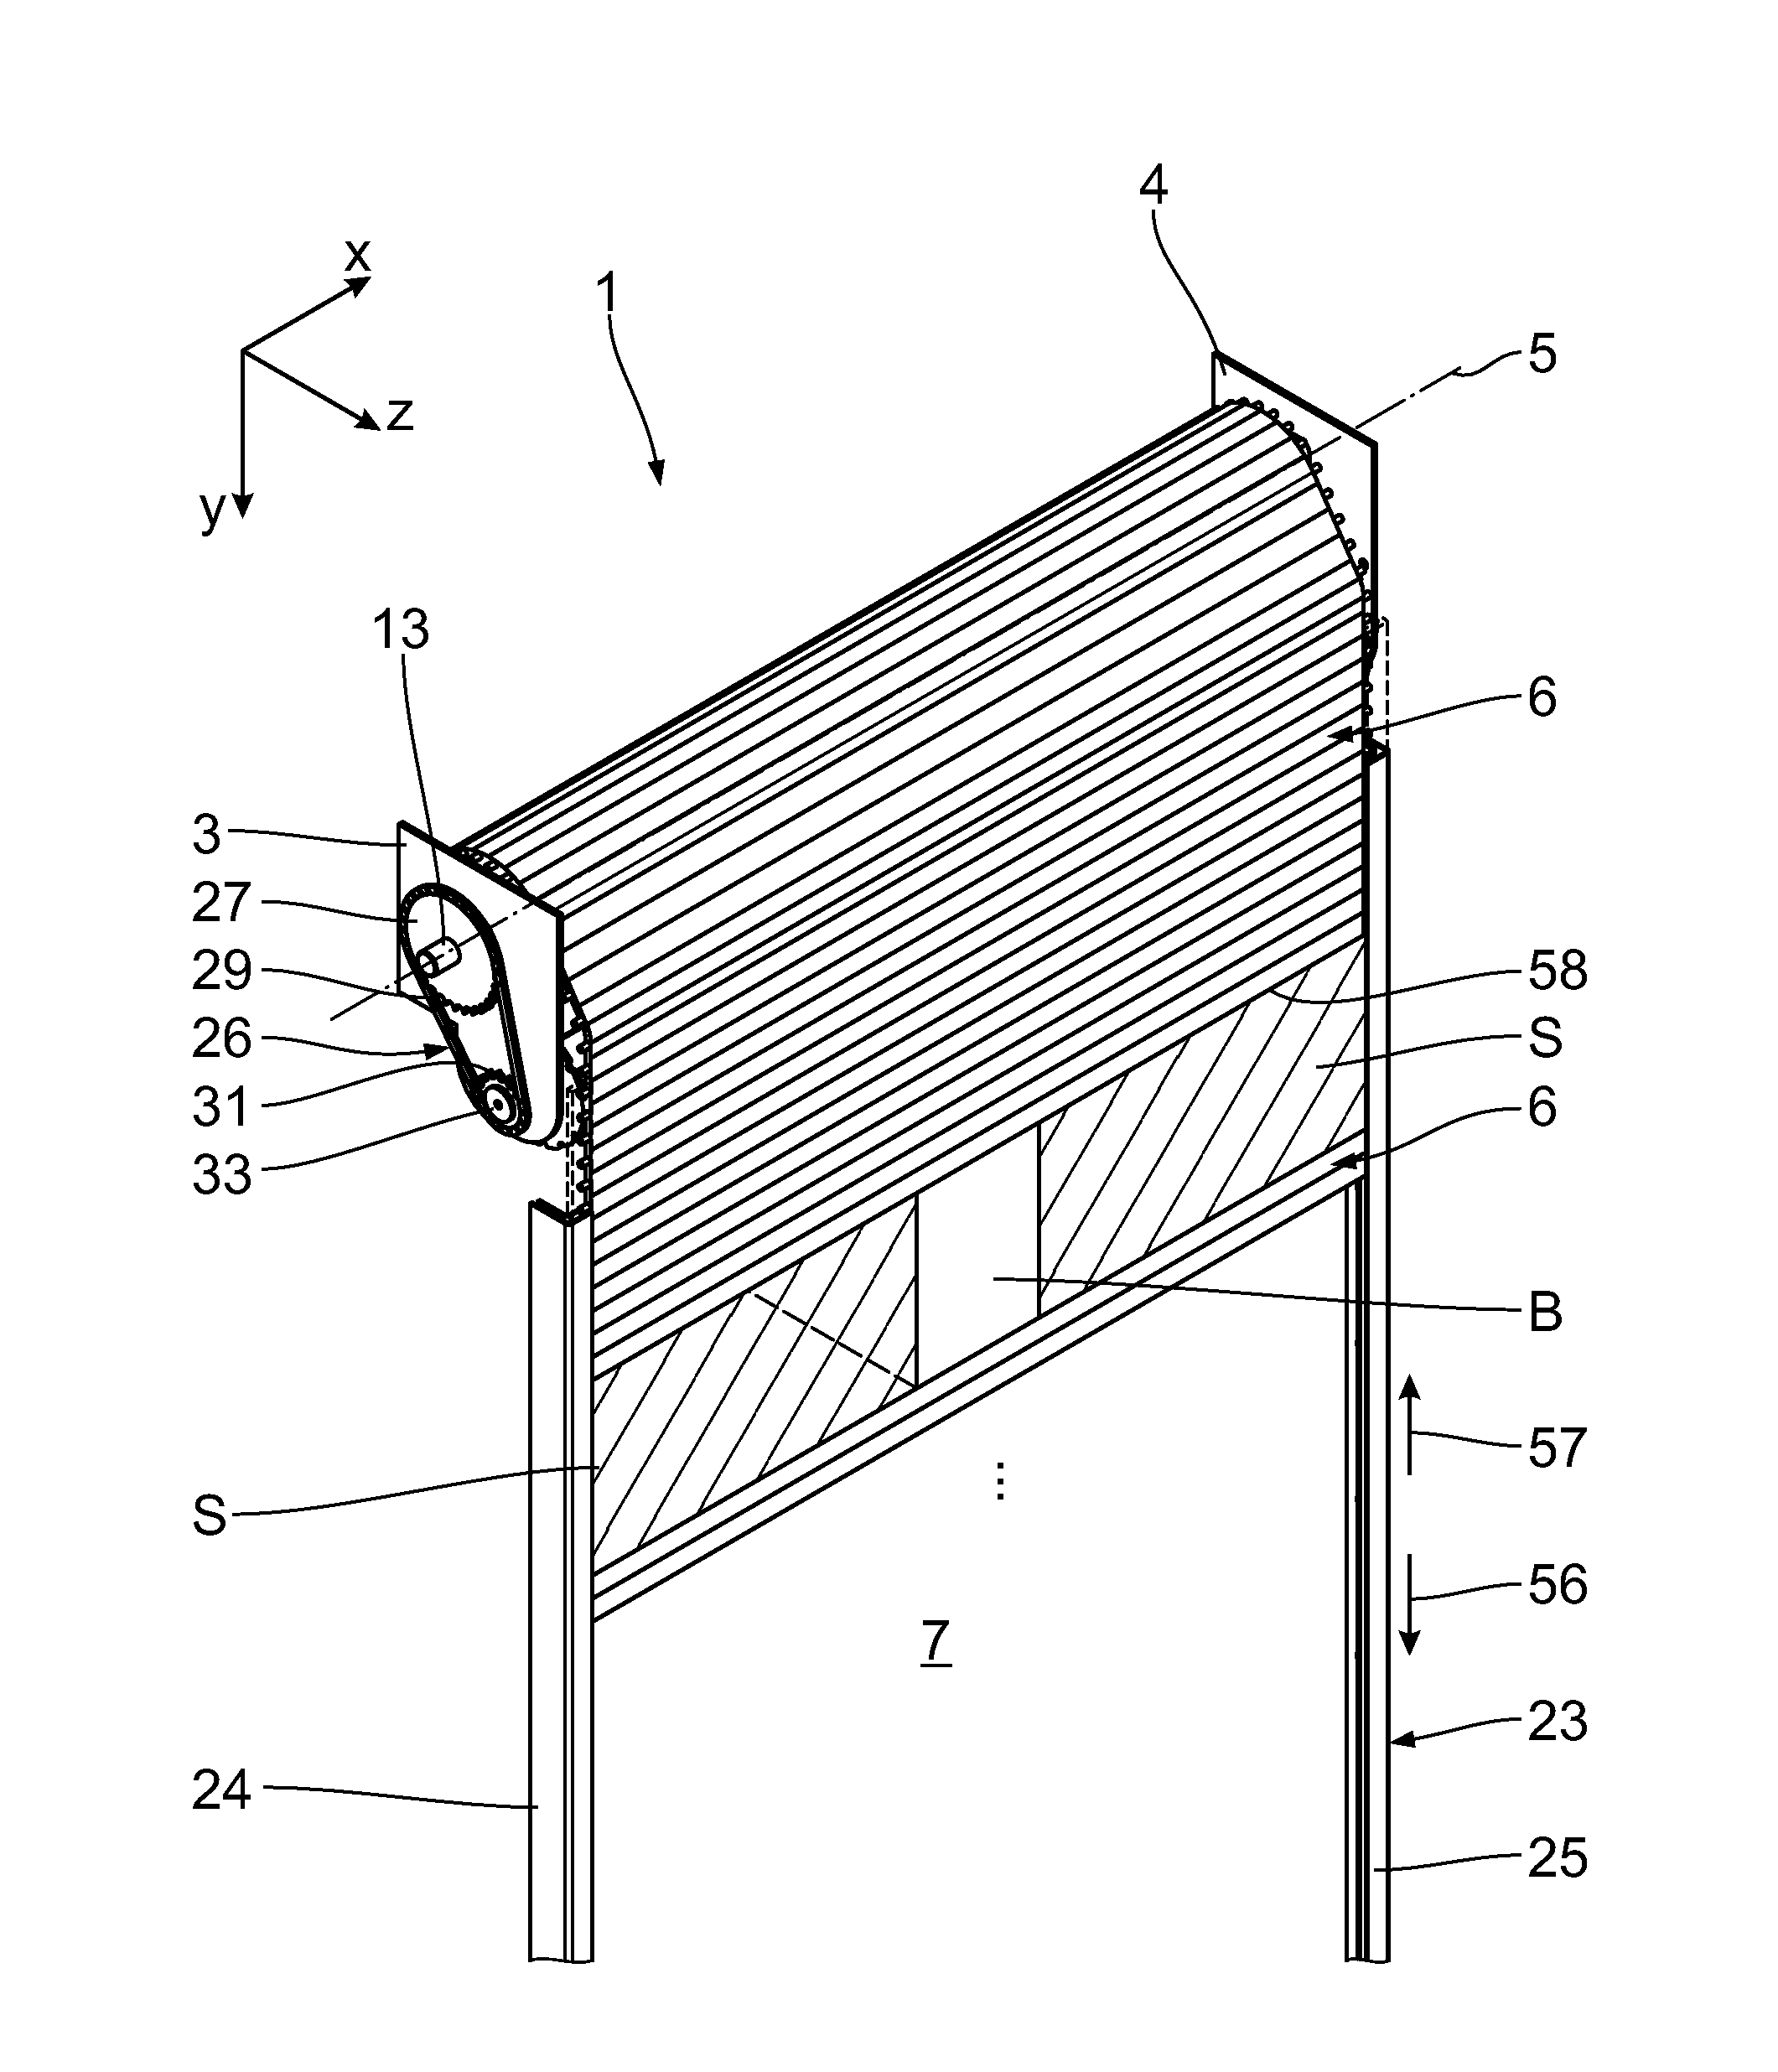 Covering device for openings, in particular for machine openings